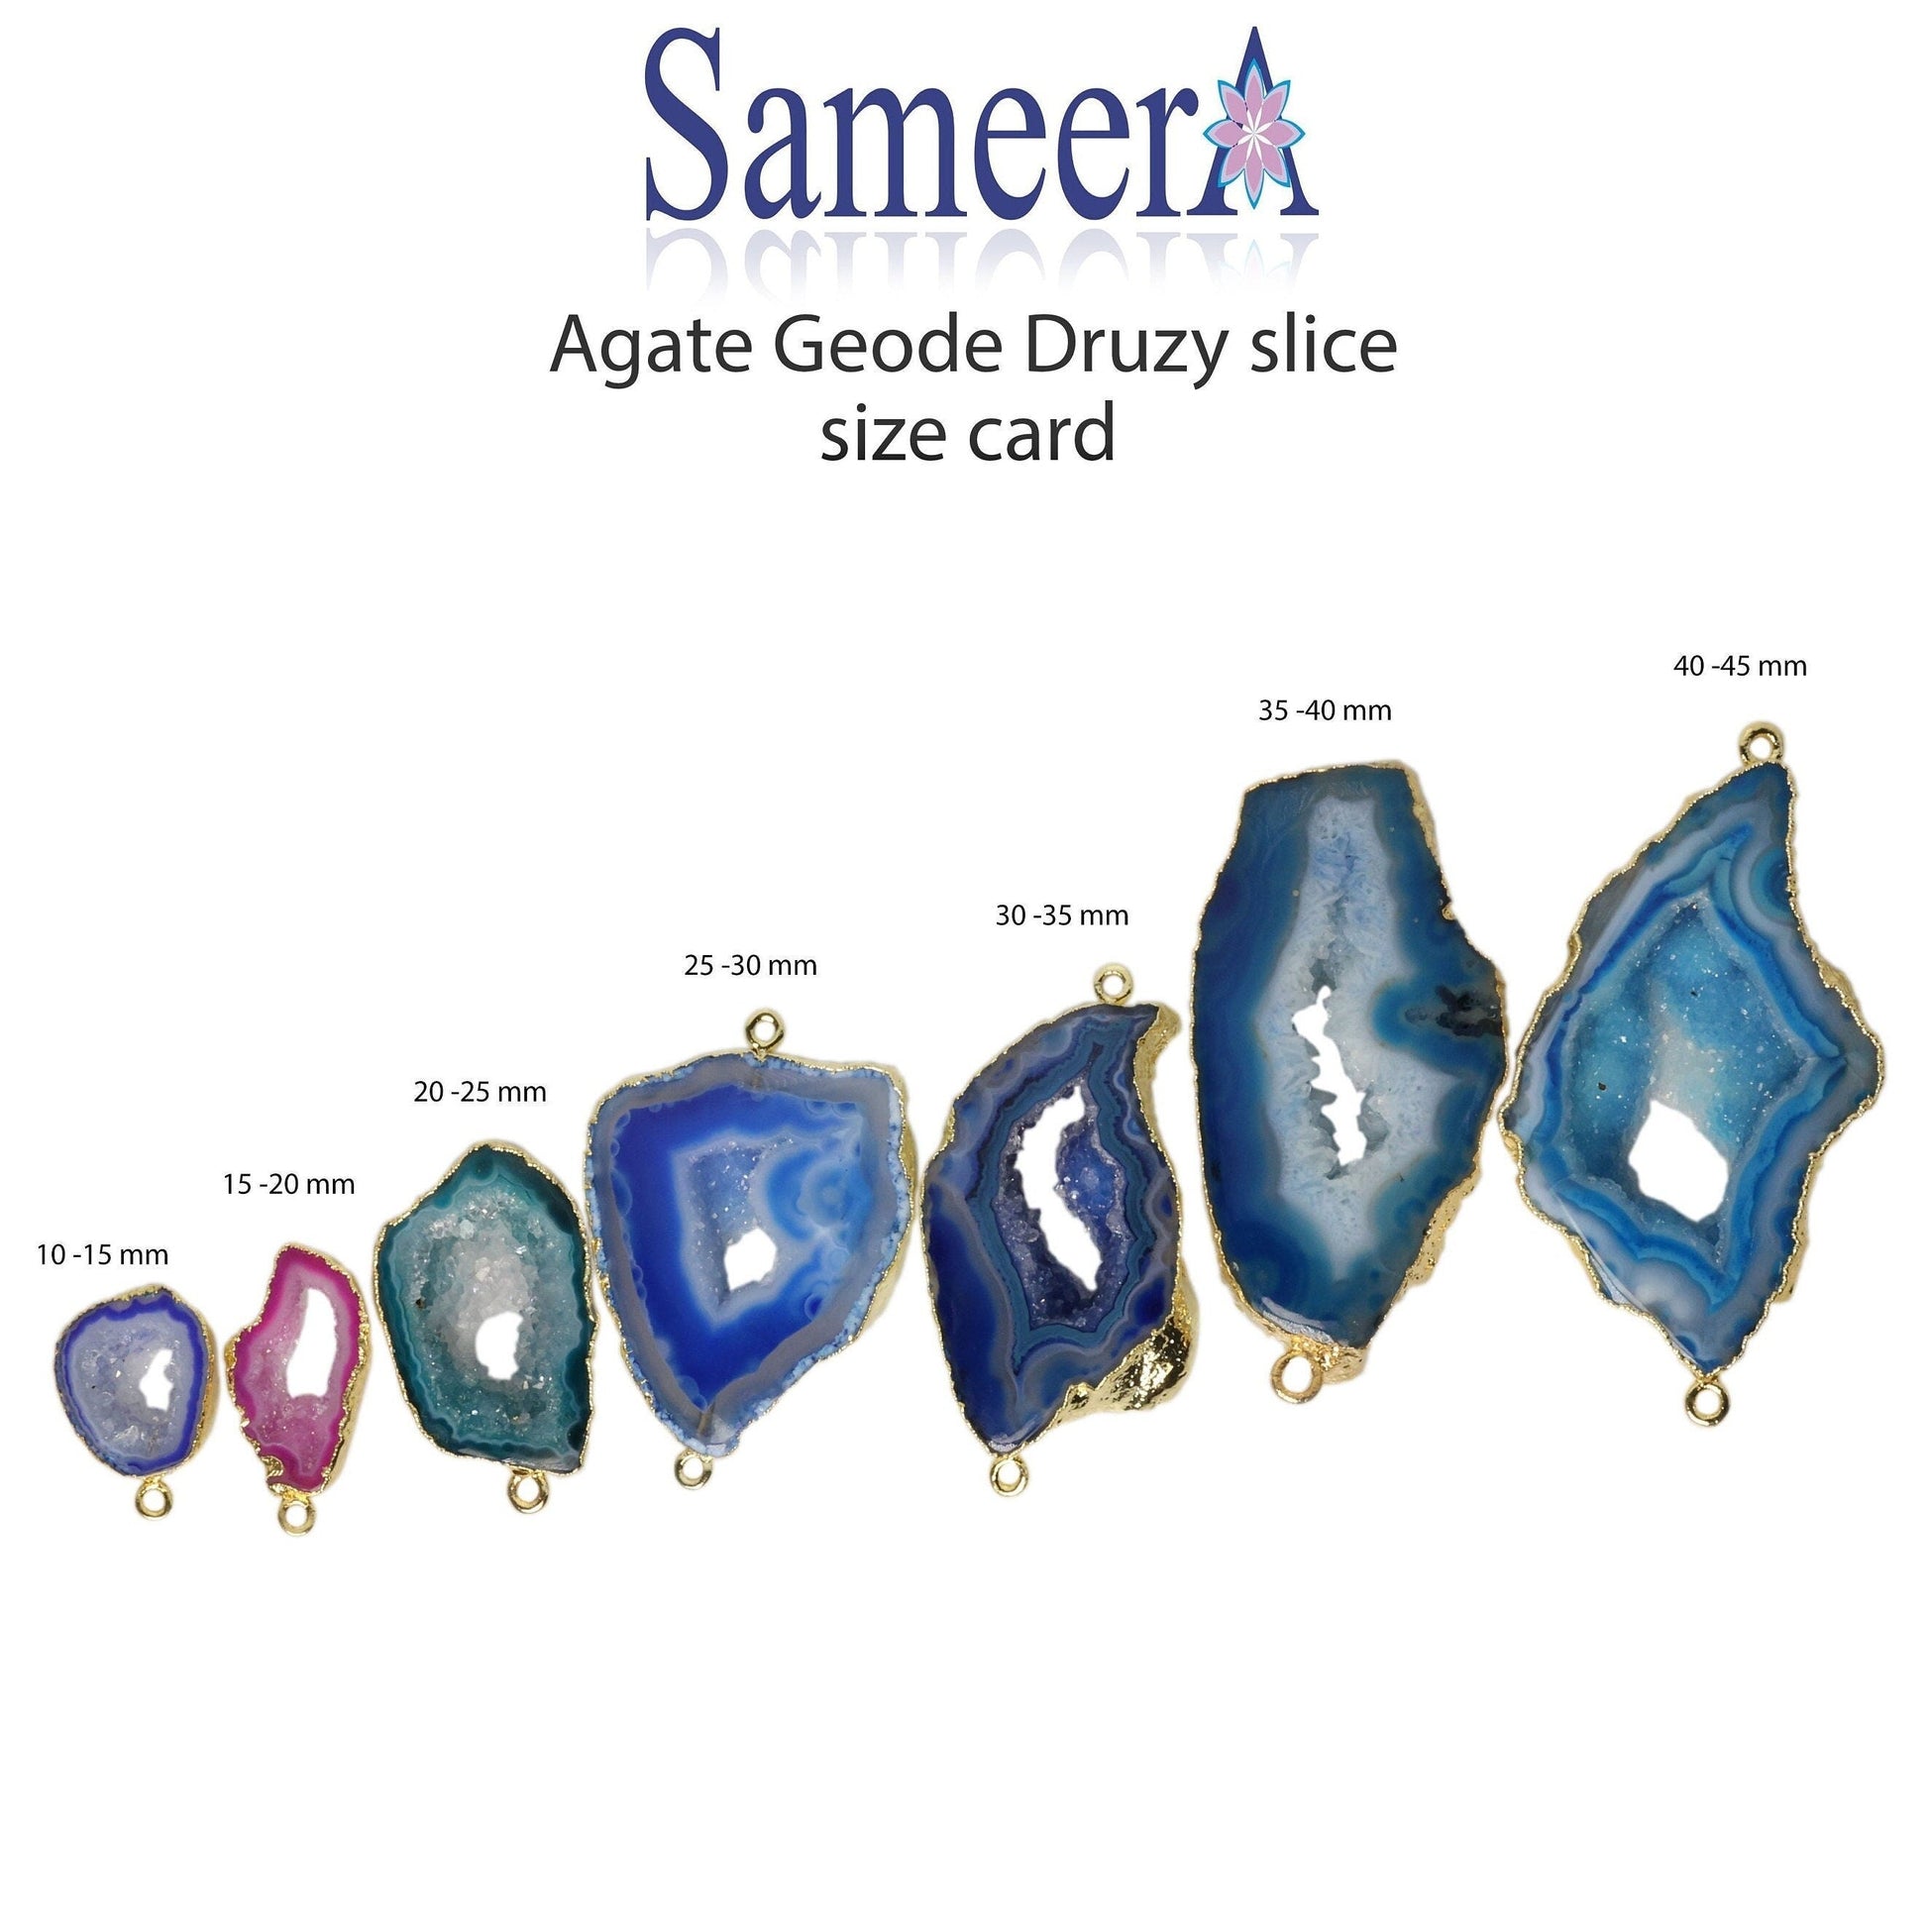 Agate Geode Druzy Slice in various sizes for Making Jewelry - Meena Design